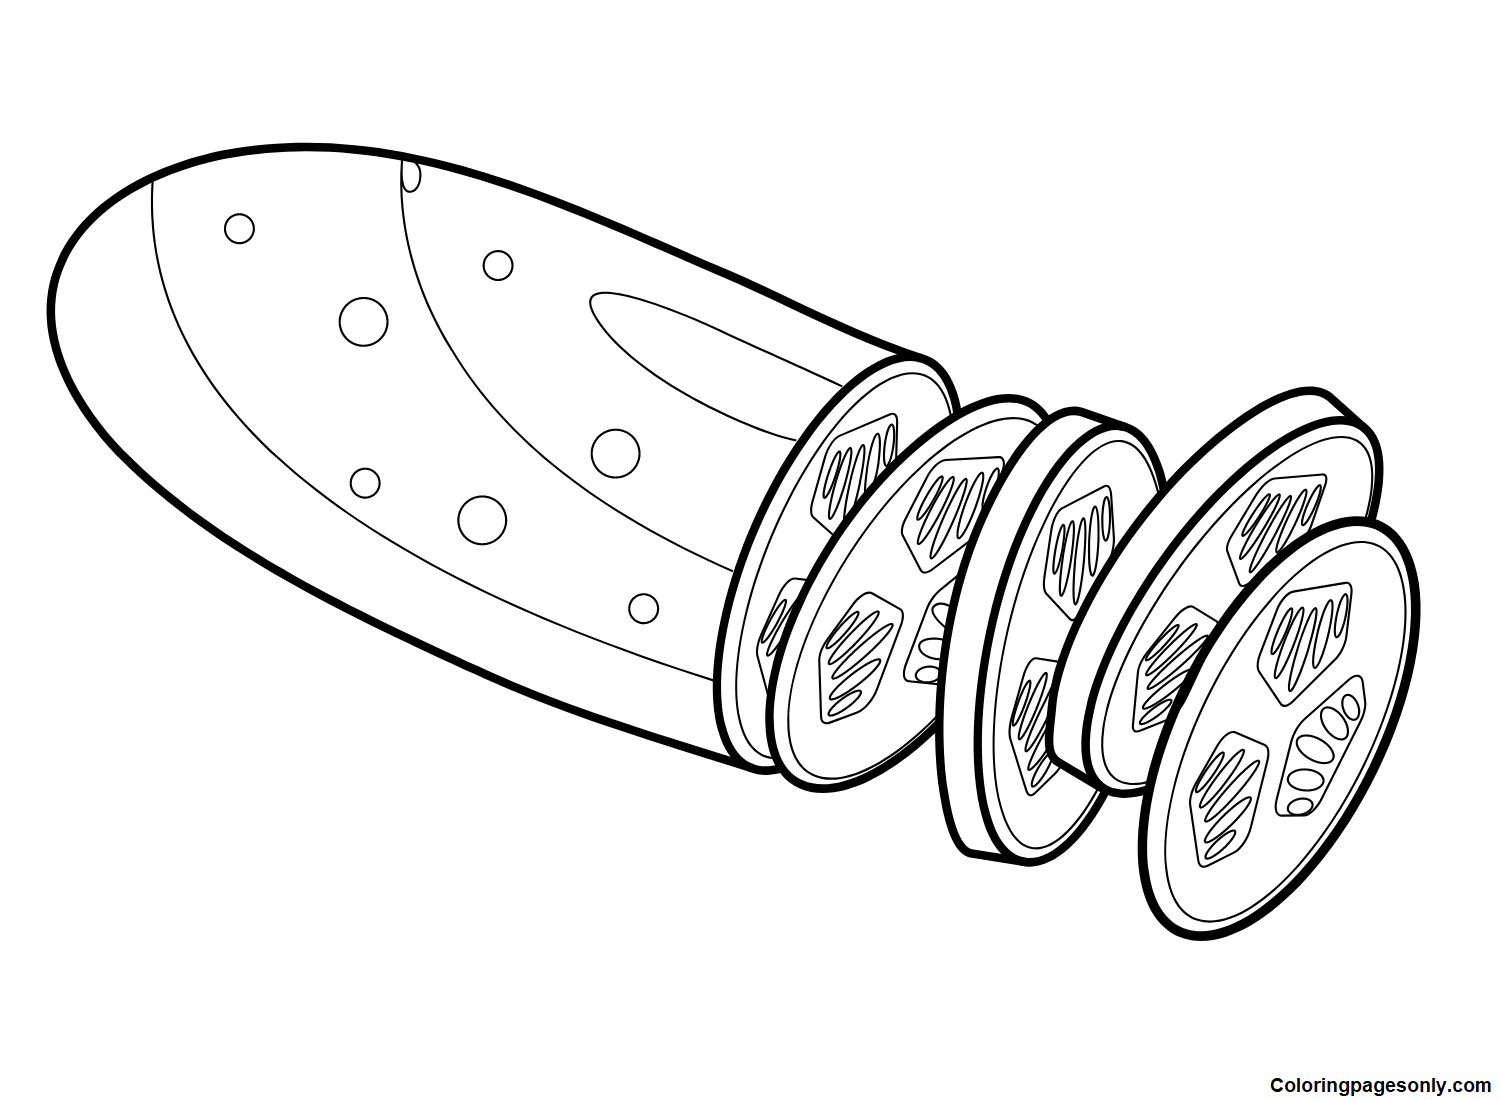 Free Cucumber Coloring Pages